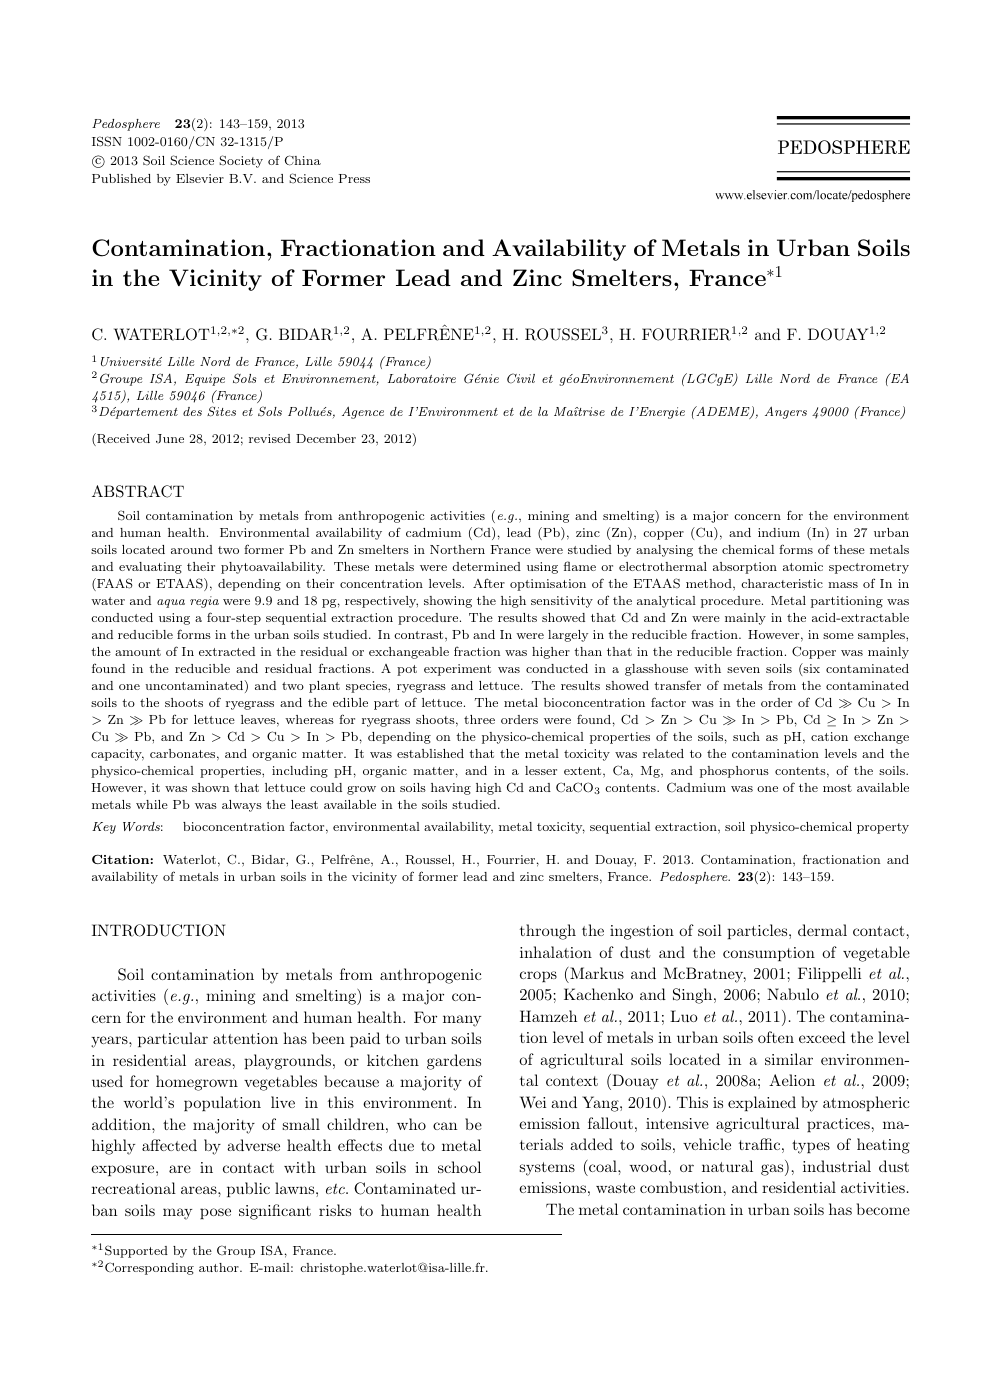 Effects Of Iron Concentration Level In Extracting Solutions From Contaminated Soils On The Determination Of Zinc By Flame Atomic Absorption Spectrometry With Two Background Correctors Topic Of Research Paper In Earth